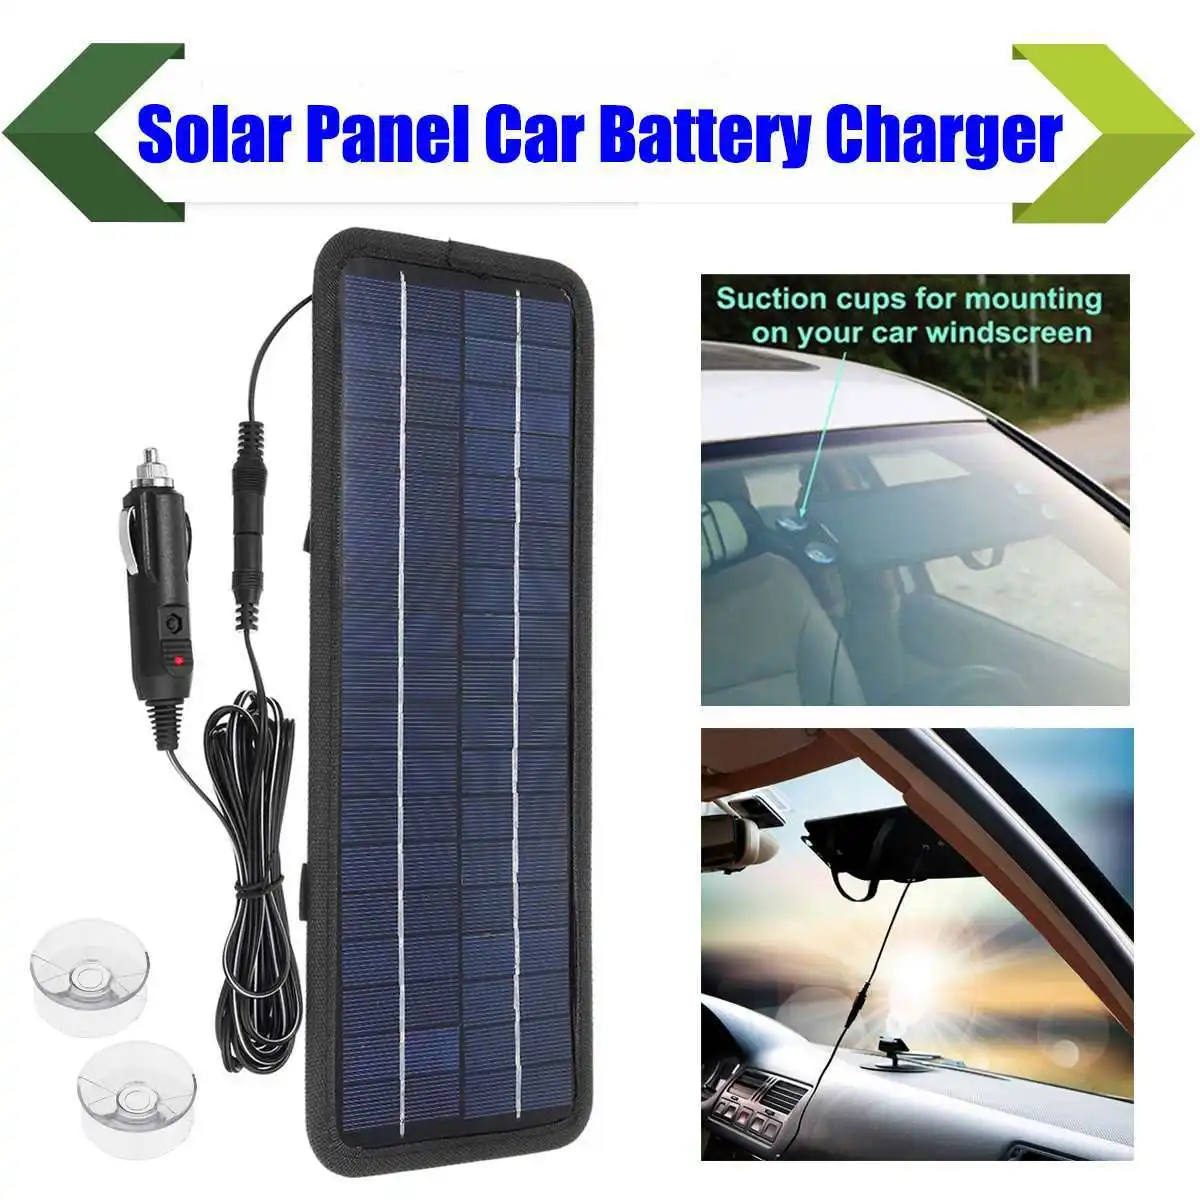 

5W 18V DC Output Monocrystalline Solar Panel Charger With Car Cigarette Lighter Plug + Battery Charging Alligator Clip Cable 5W